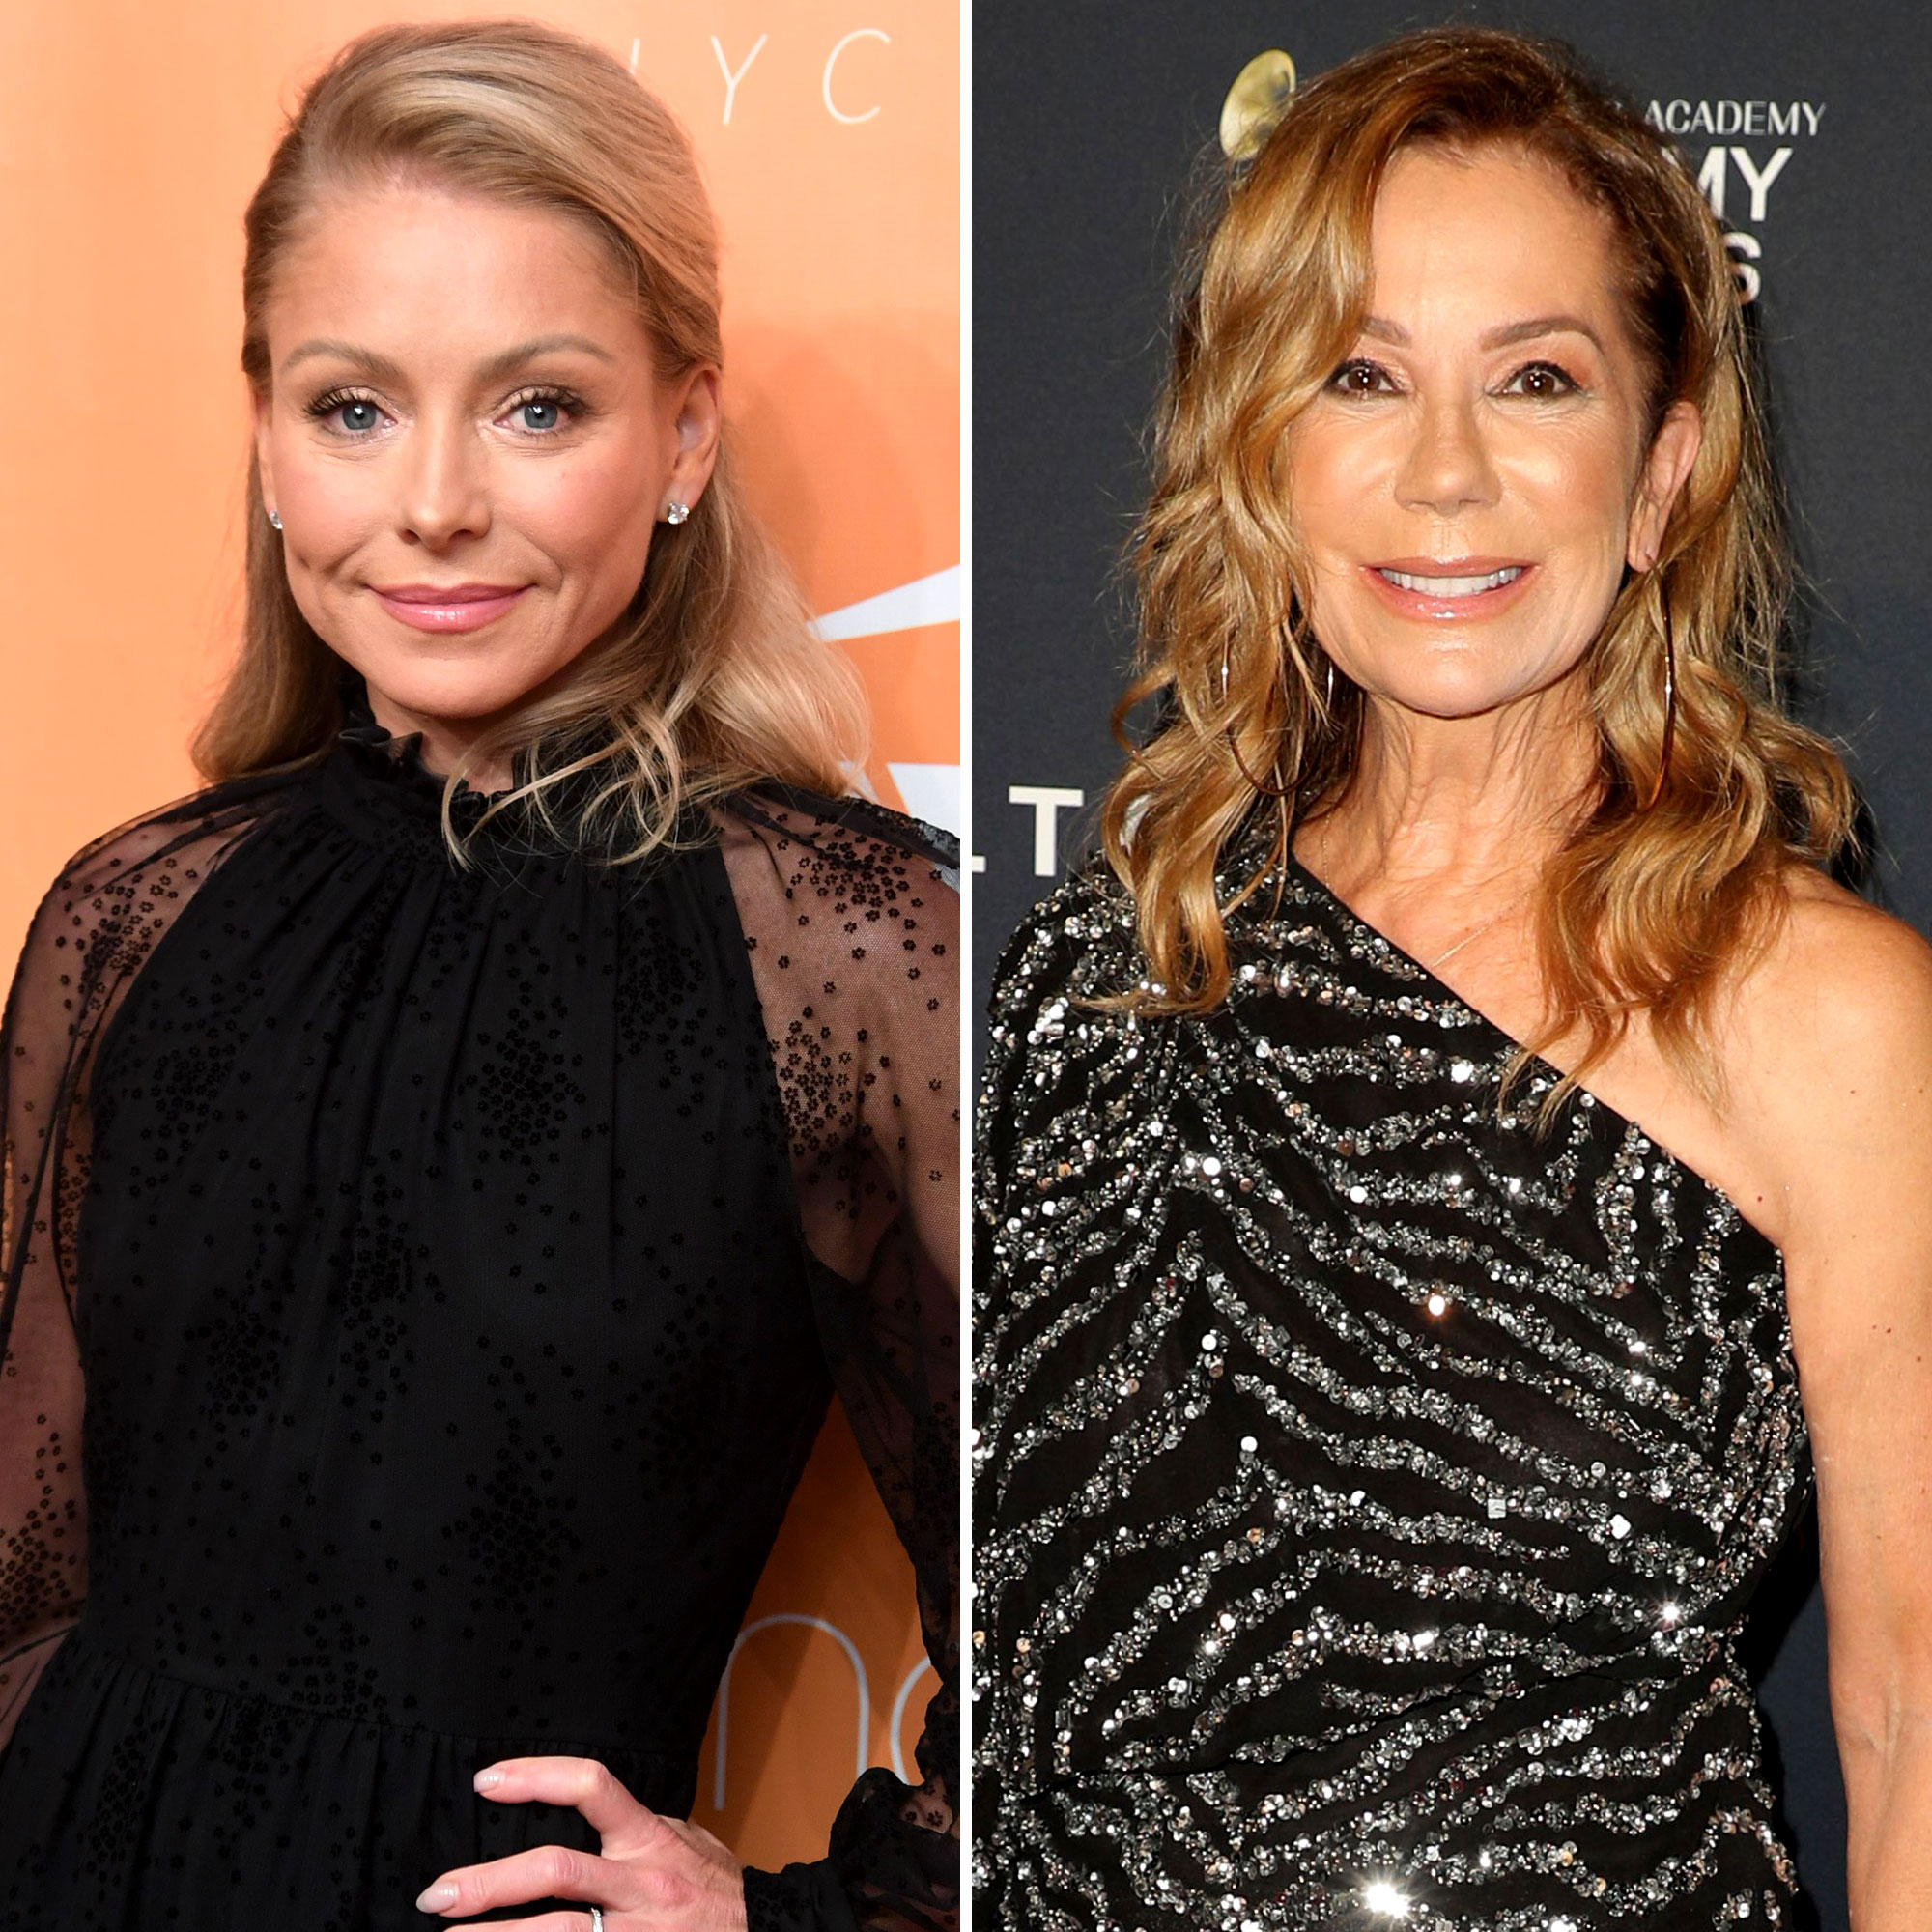 Kelly Ripa and Kathie Lee Gifford Quotes About Each Other